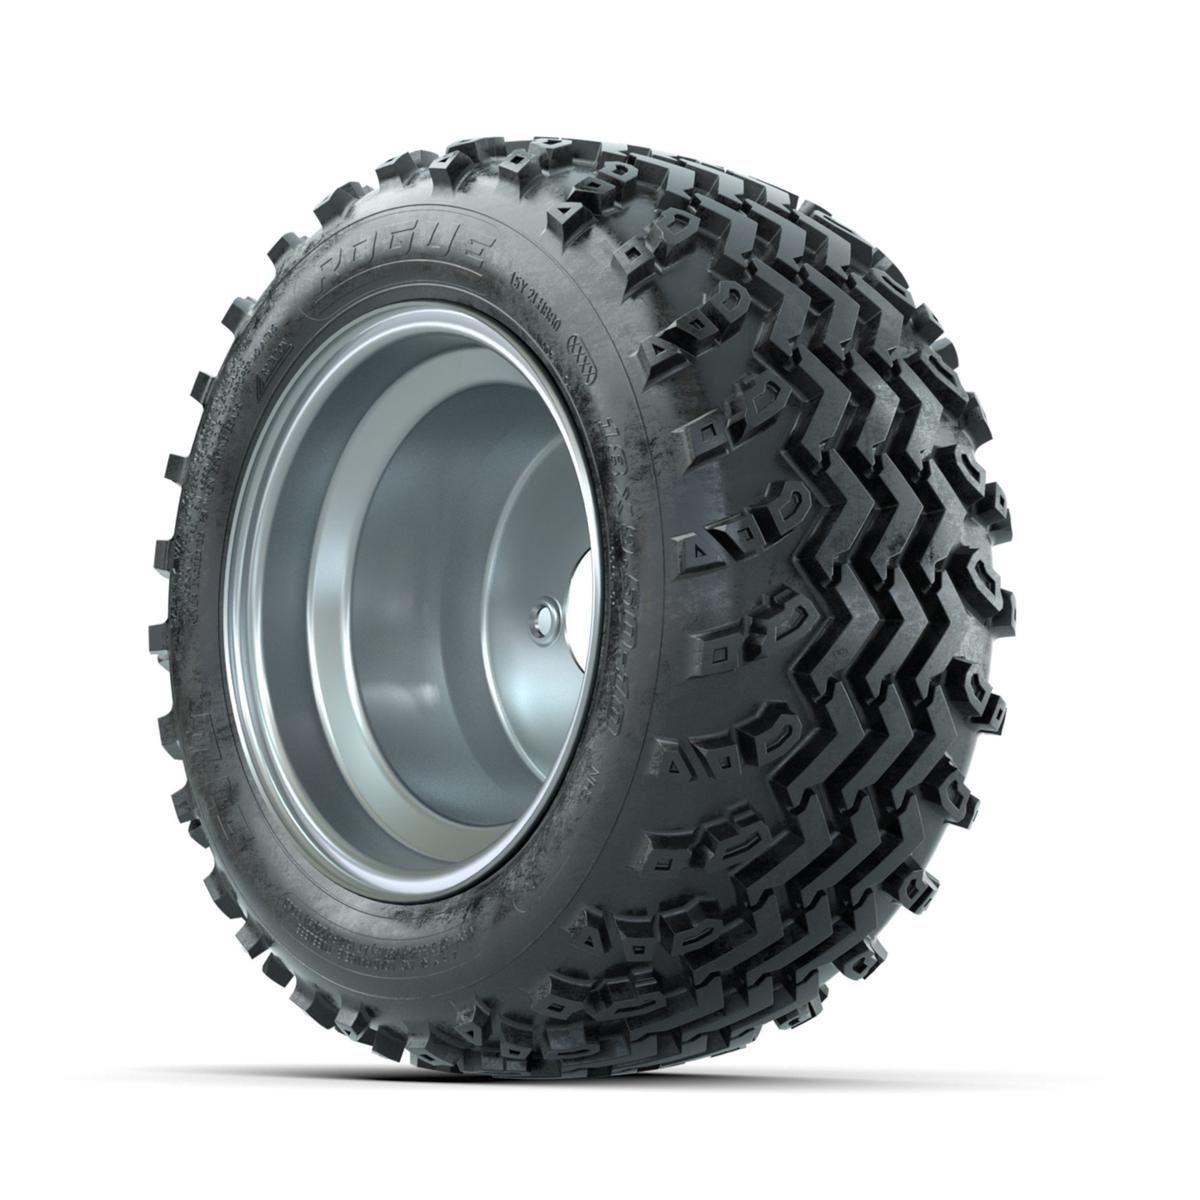 GTW Steel Silver 3:5 Offset 10 in Wheels with 18x9.50-10 Rogue All Terrain Tires – Full Set